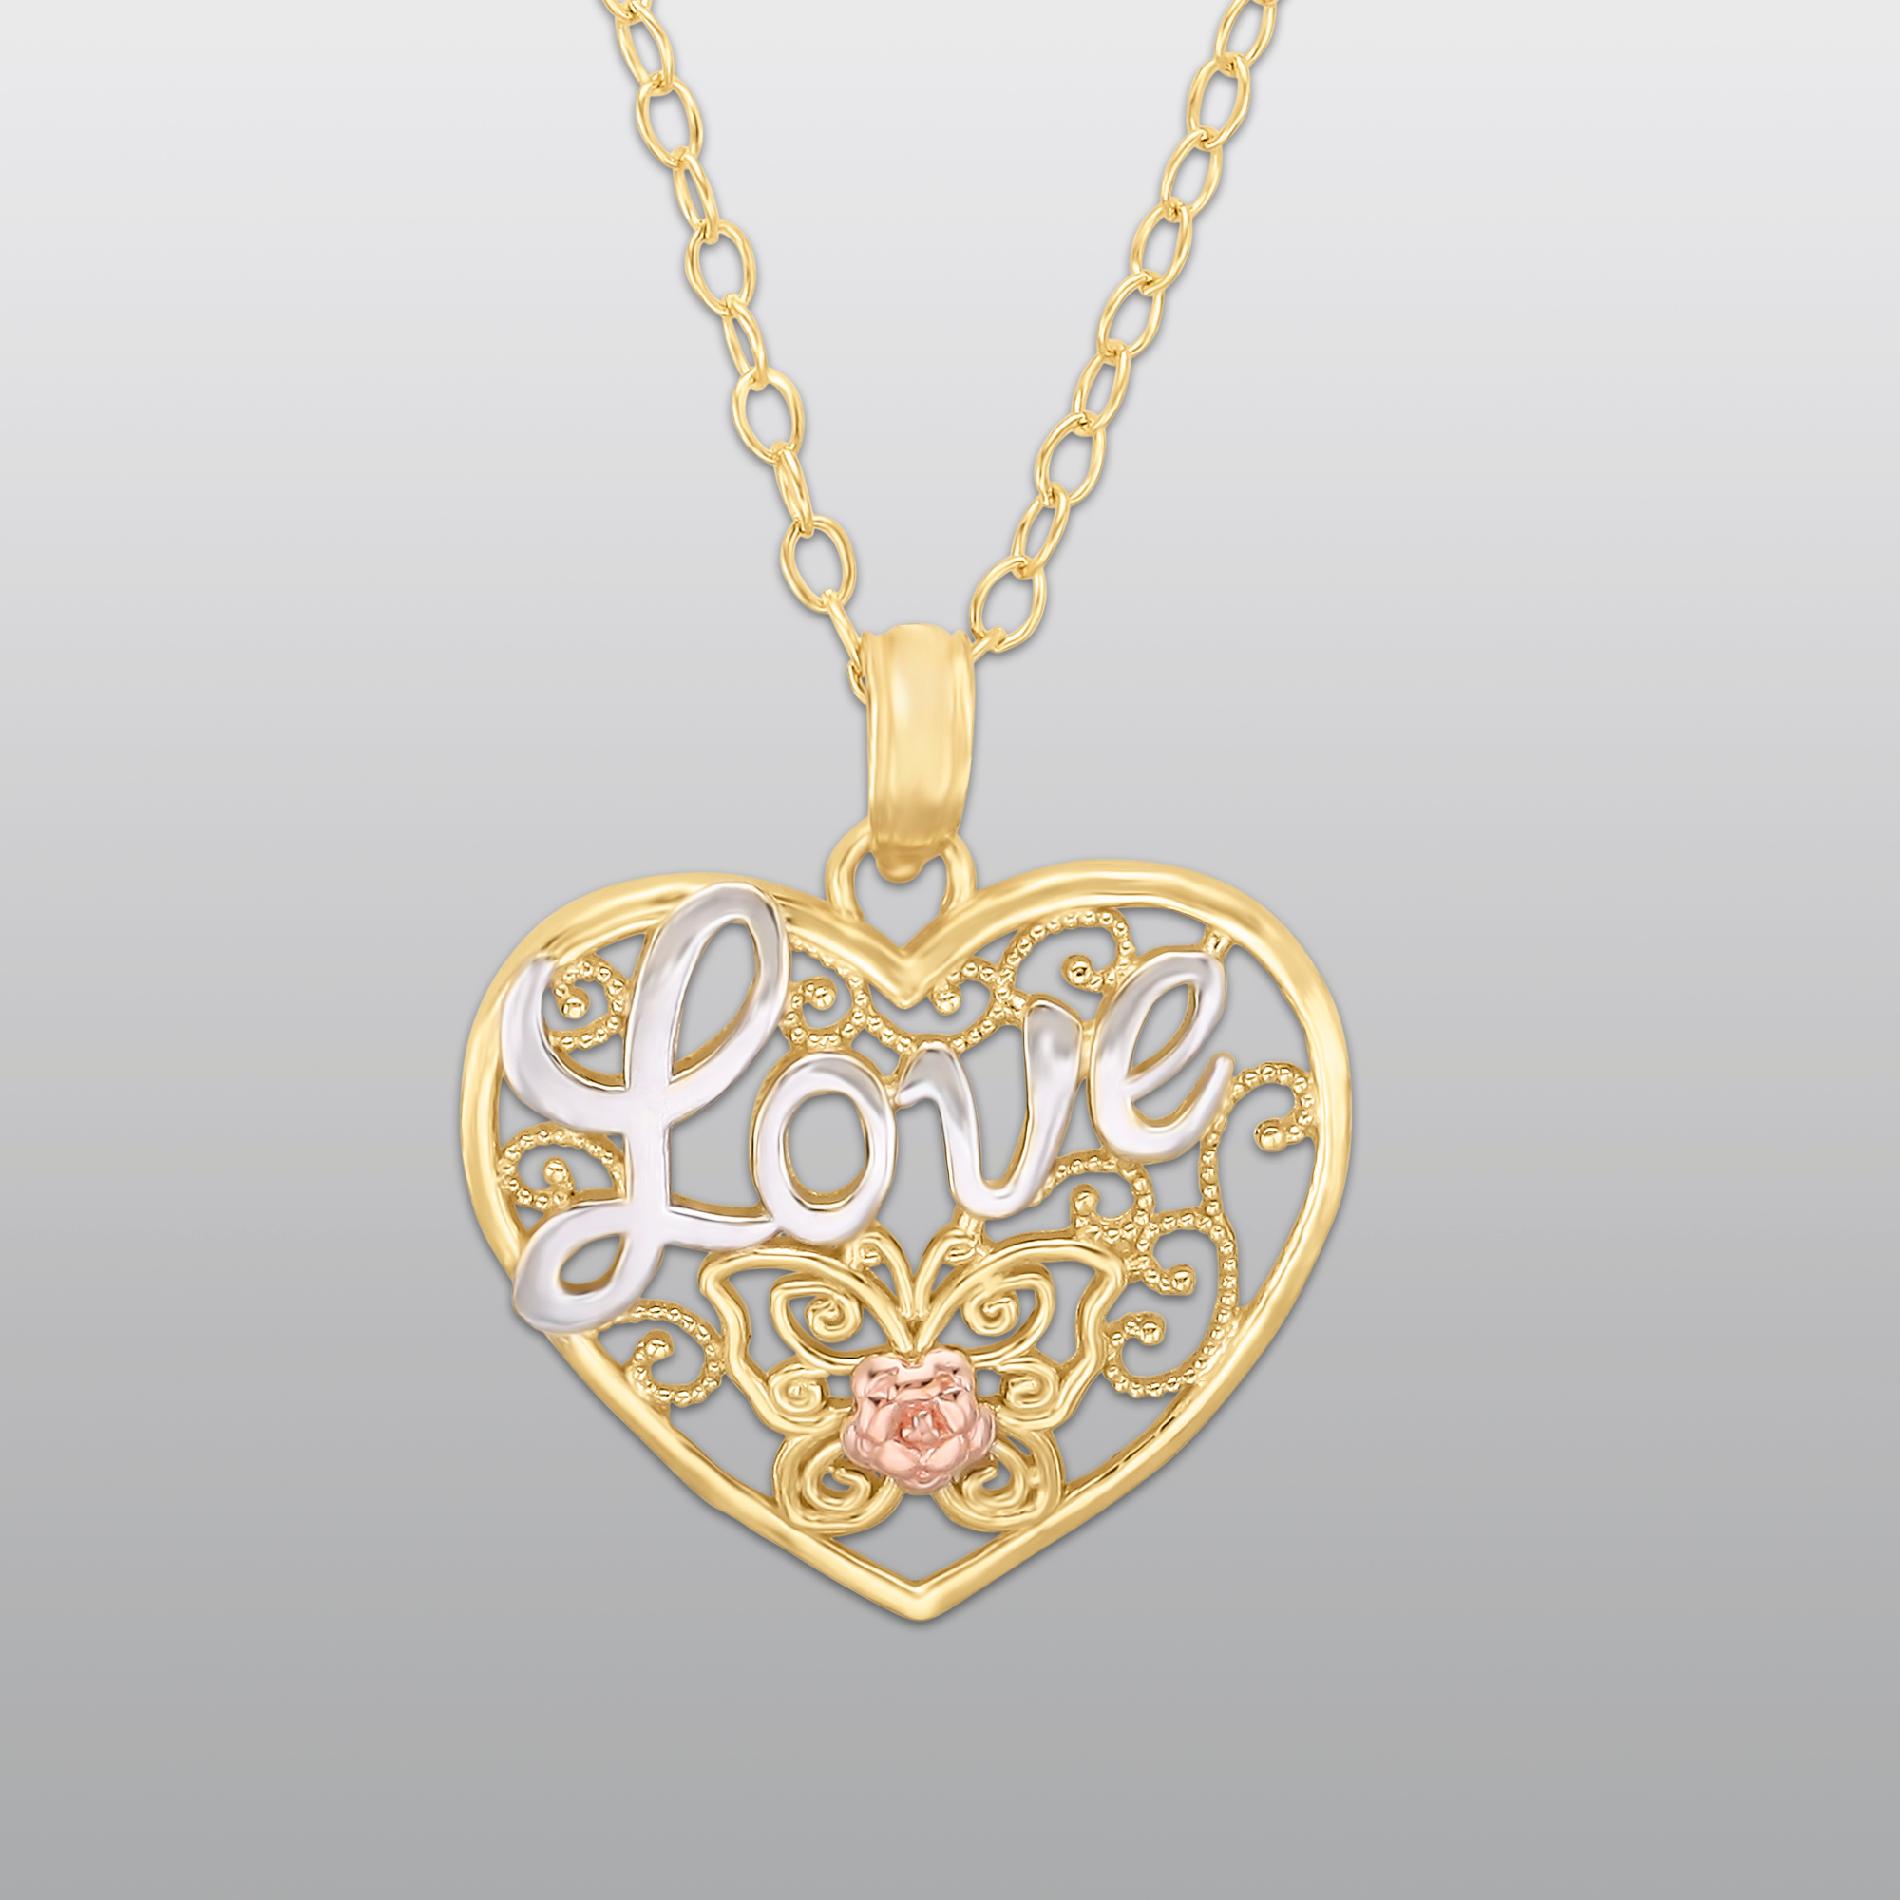 True Gold 10K Tricolor Love Heart Pendant on Gold Filled Chain